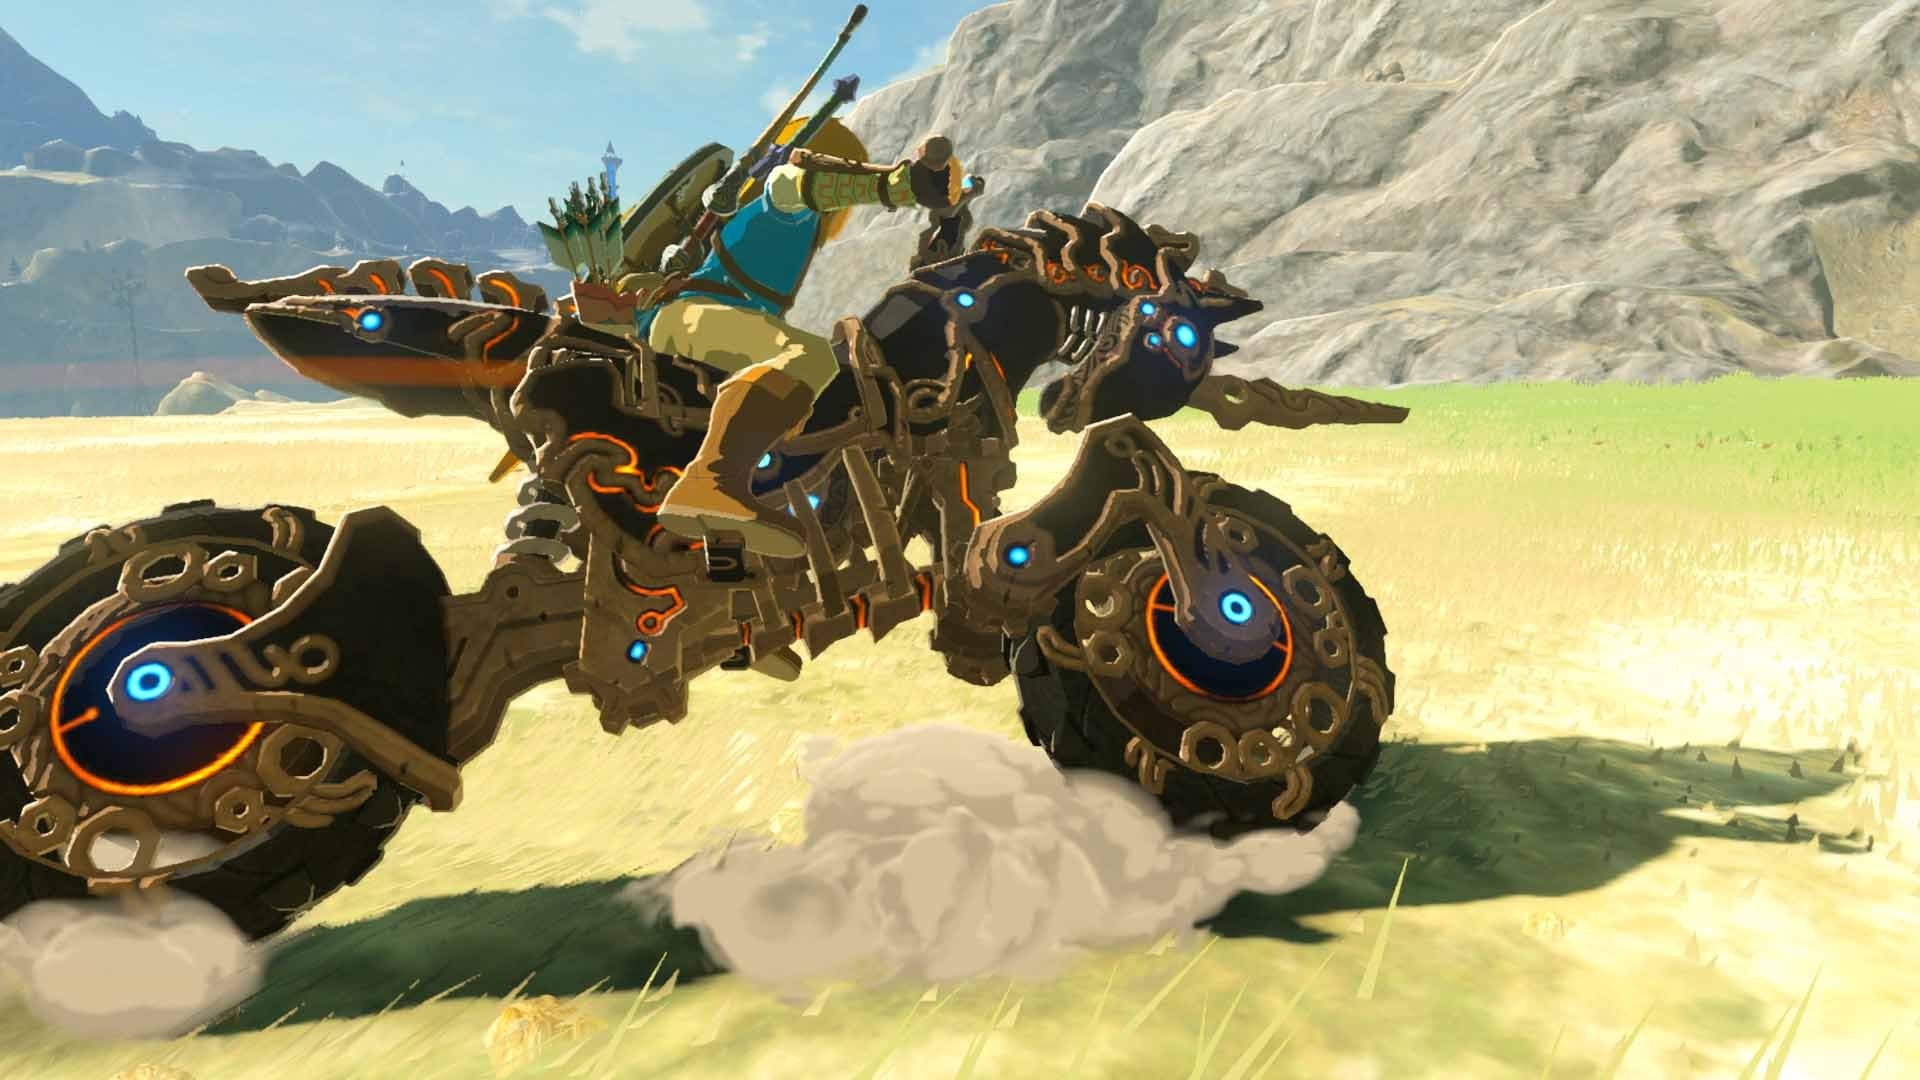 The Legend of Zelda: Breath of the Wild - Expansion Pass: DLC Pack